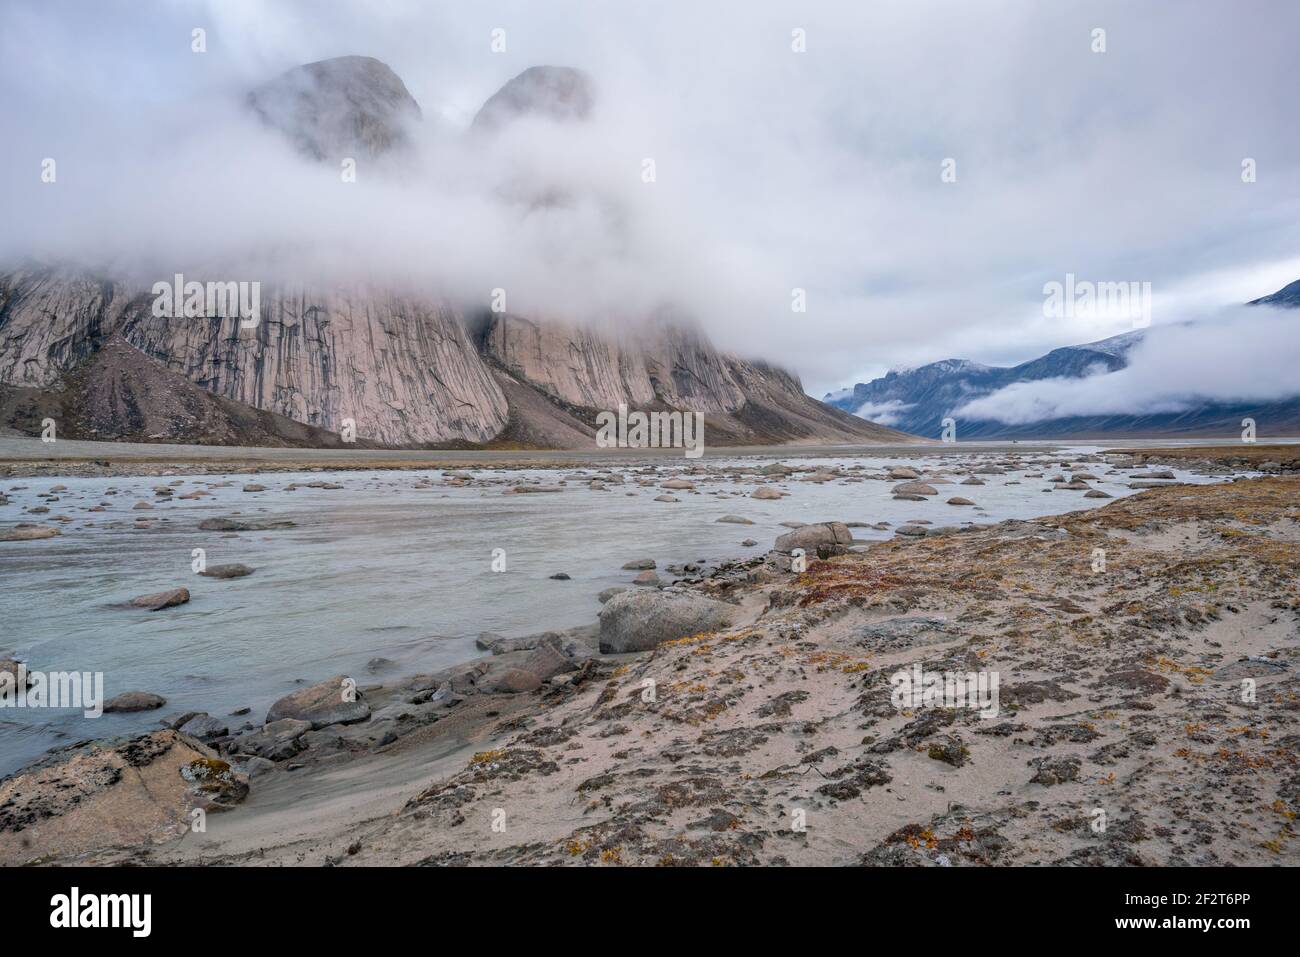 Majestic granite rocks by the surface. Wild arctic landscape of Akshayuk Pass, Baffin Island, Canada on a cloudy, rainy day of arctic summer. Stock Photo